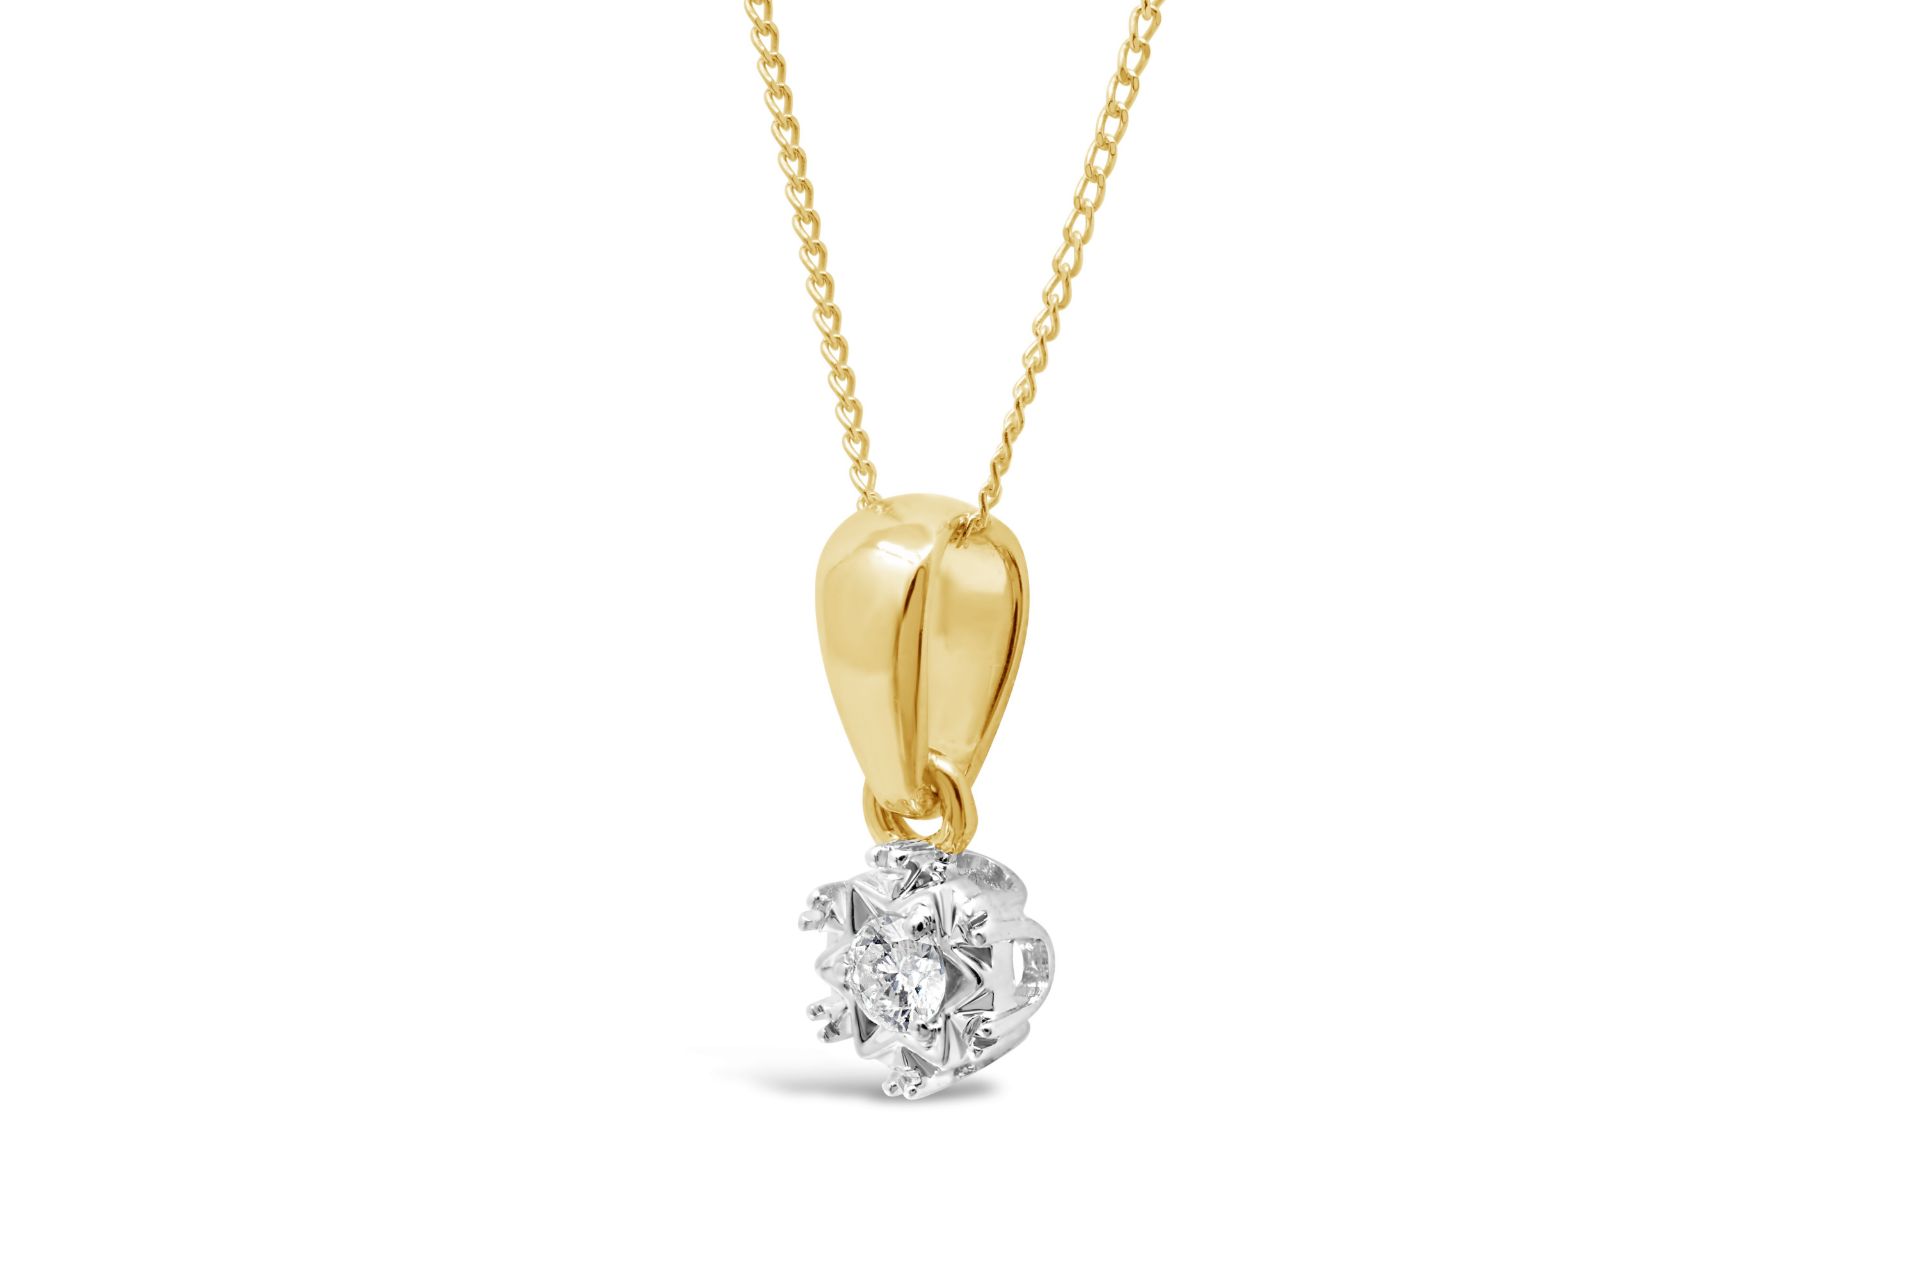 Diamond necklace with detailed setting and a bright diamond - Image 3 of 3